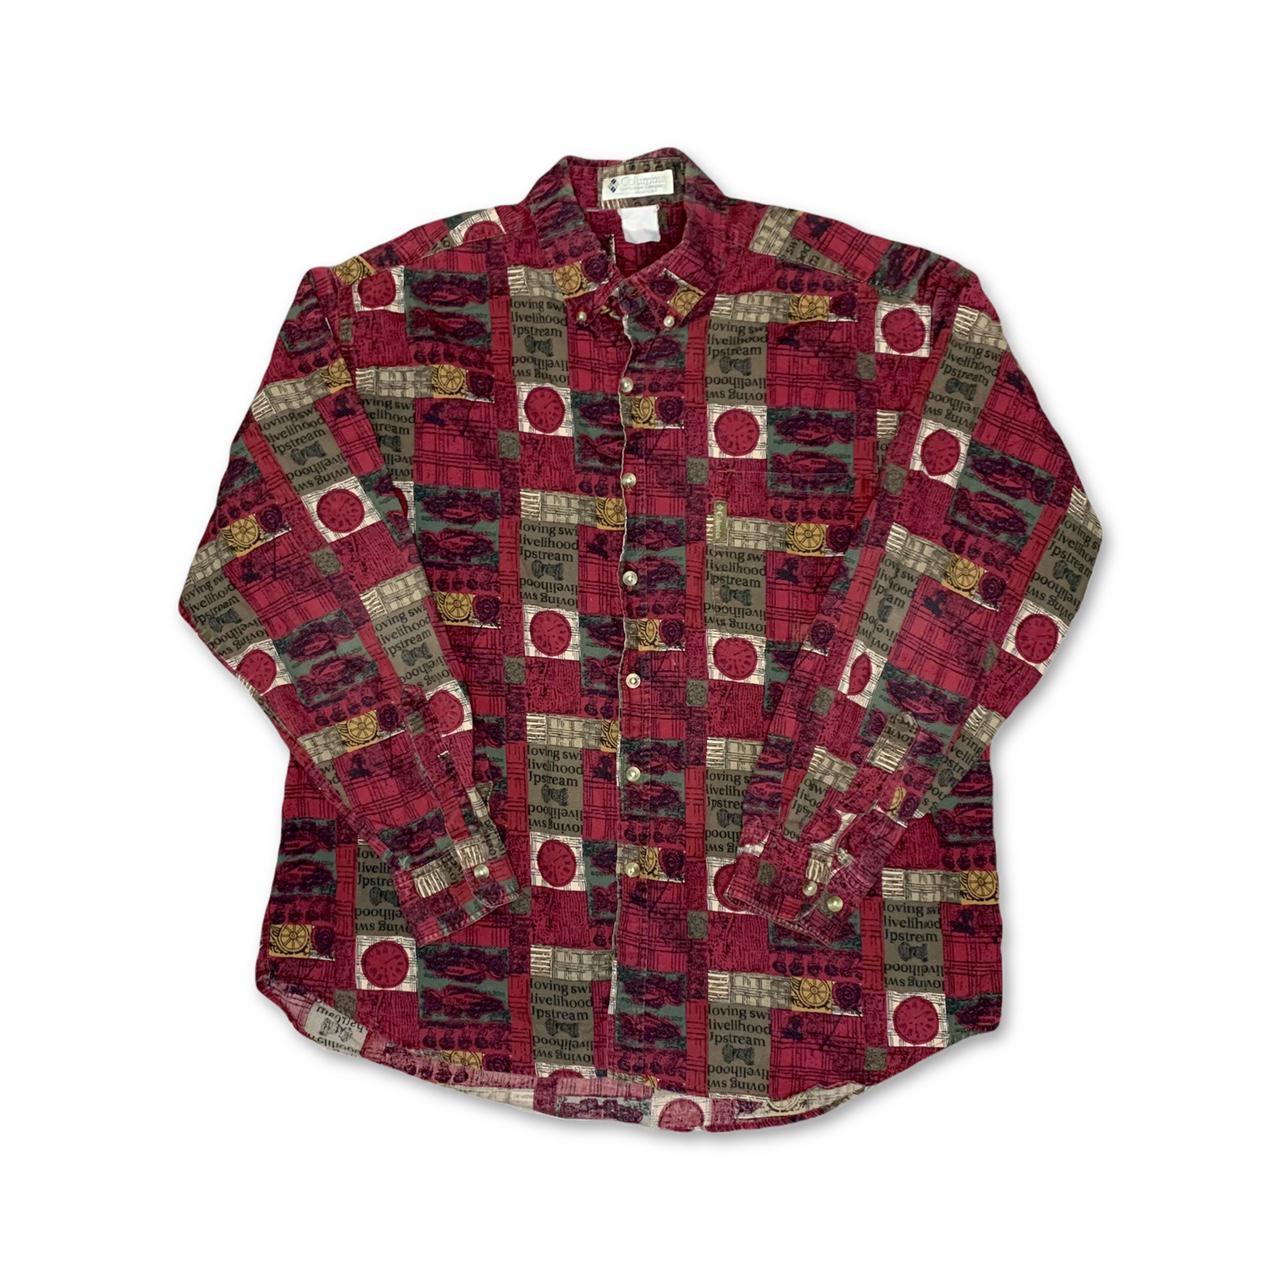 Product Image 1 - Vintage Columbia Shirt

- Great Condition!
-